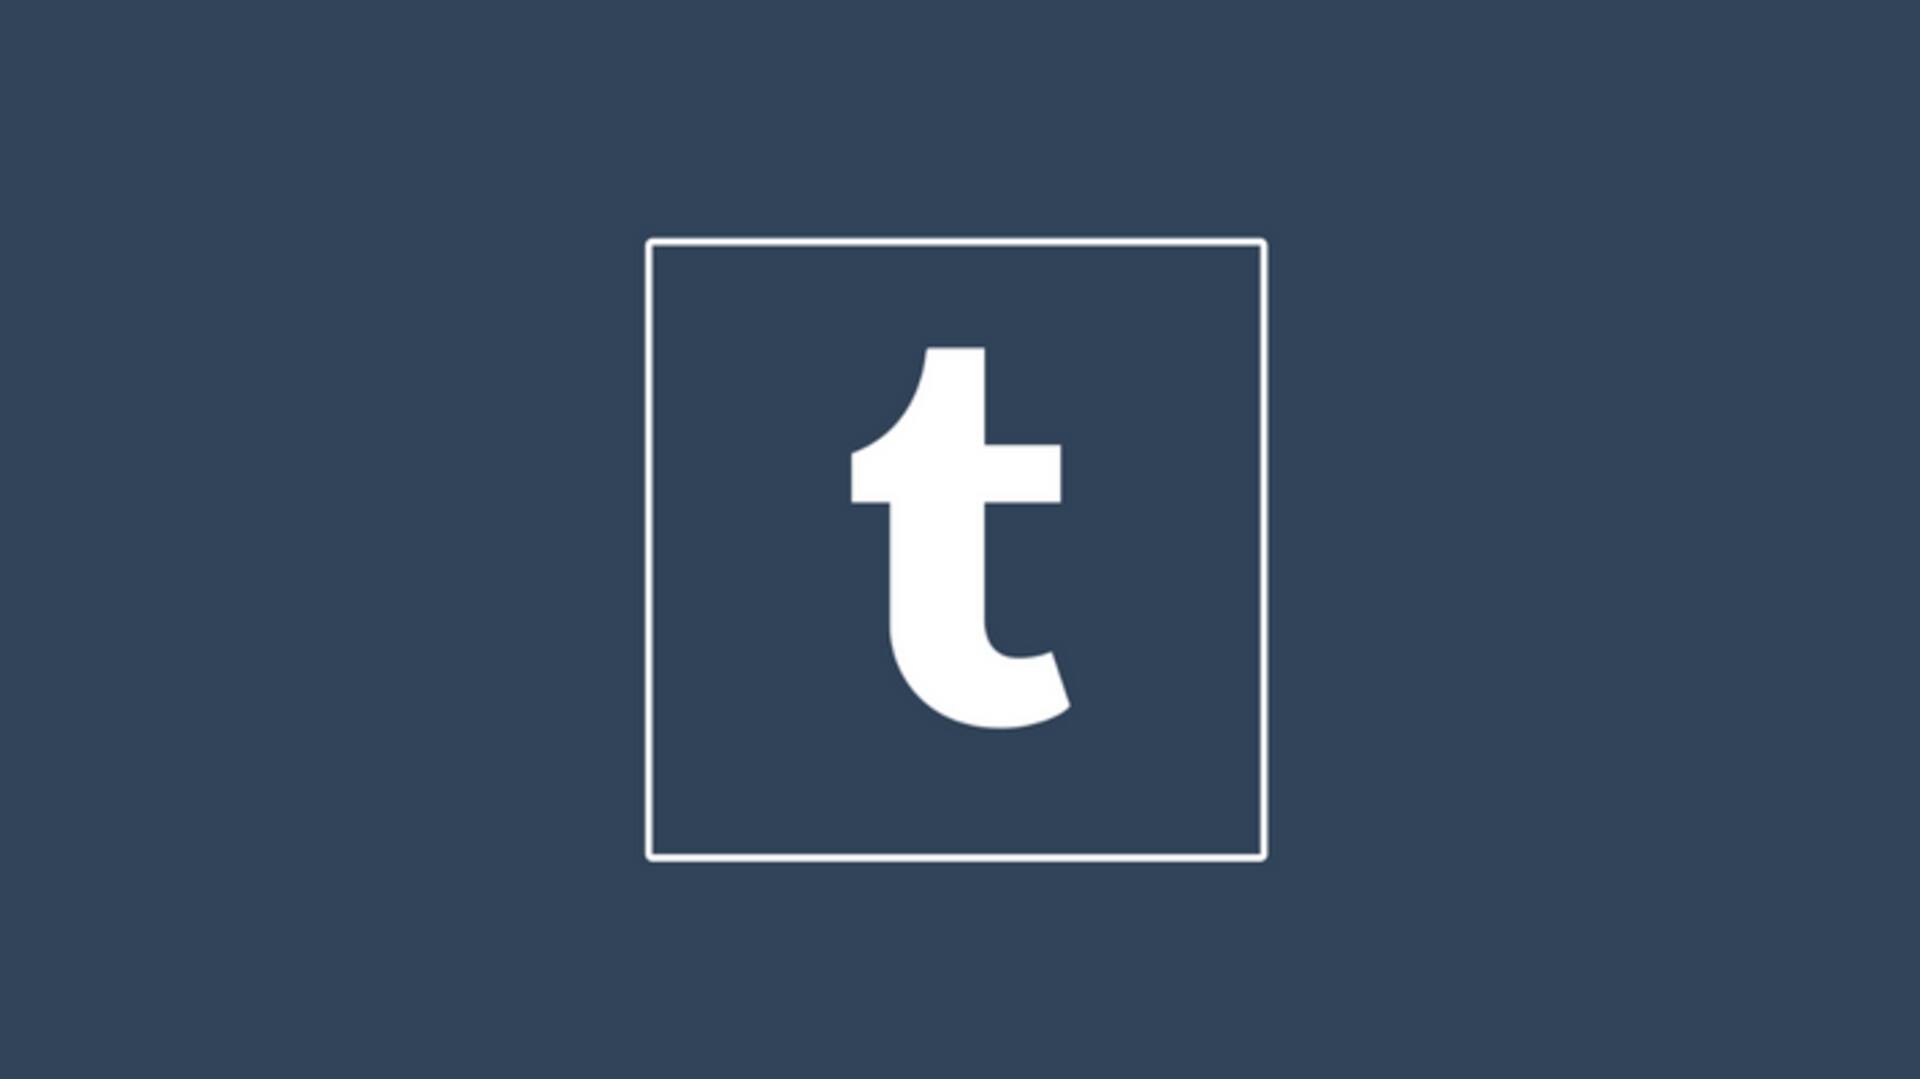 Tumblr discontinues Post Plus subscriptions: Here's why